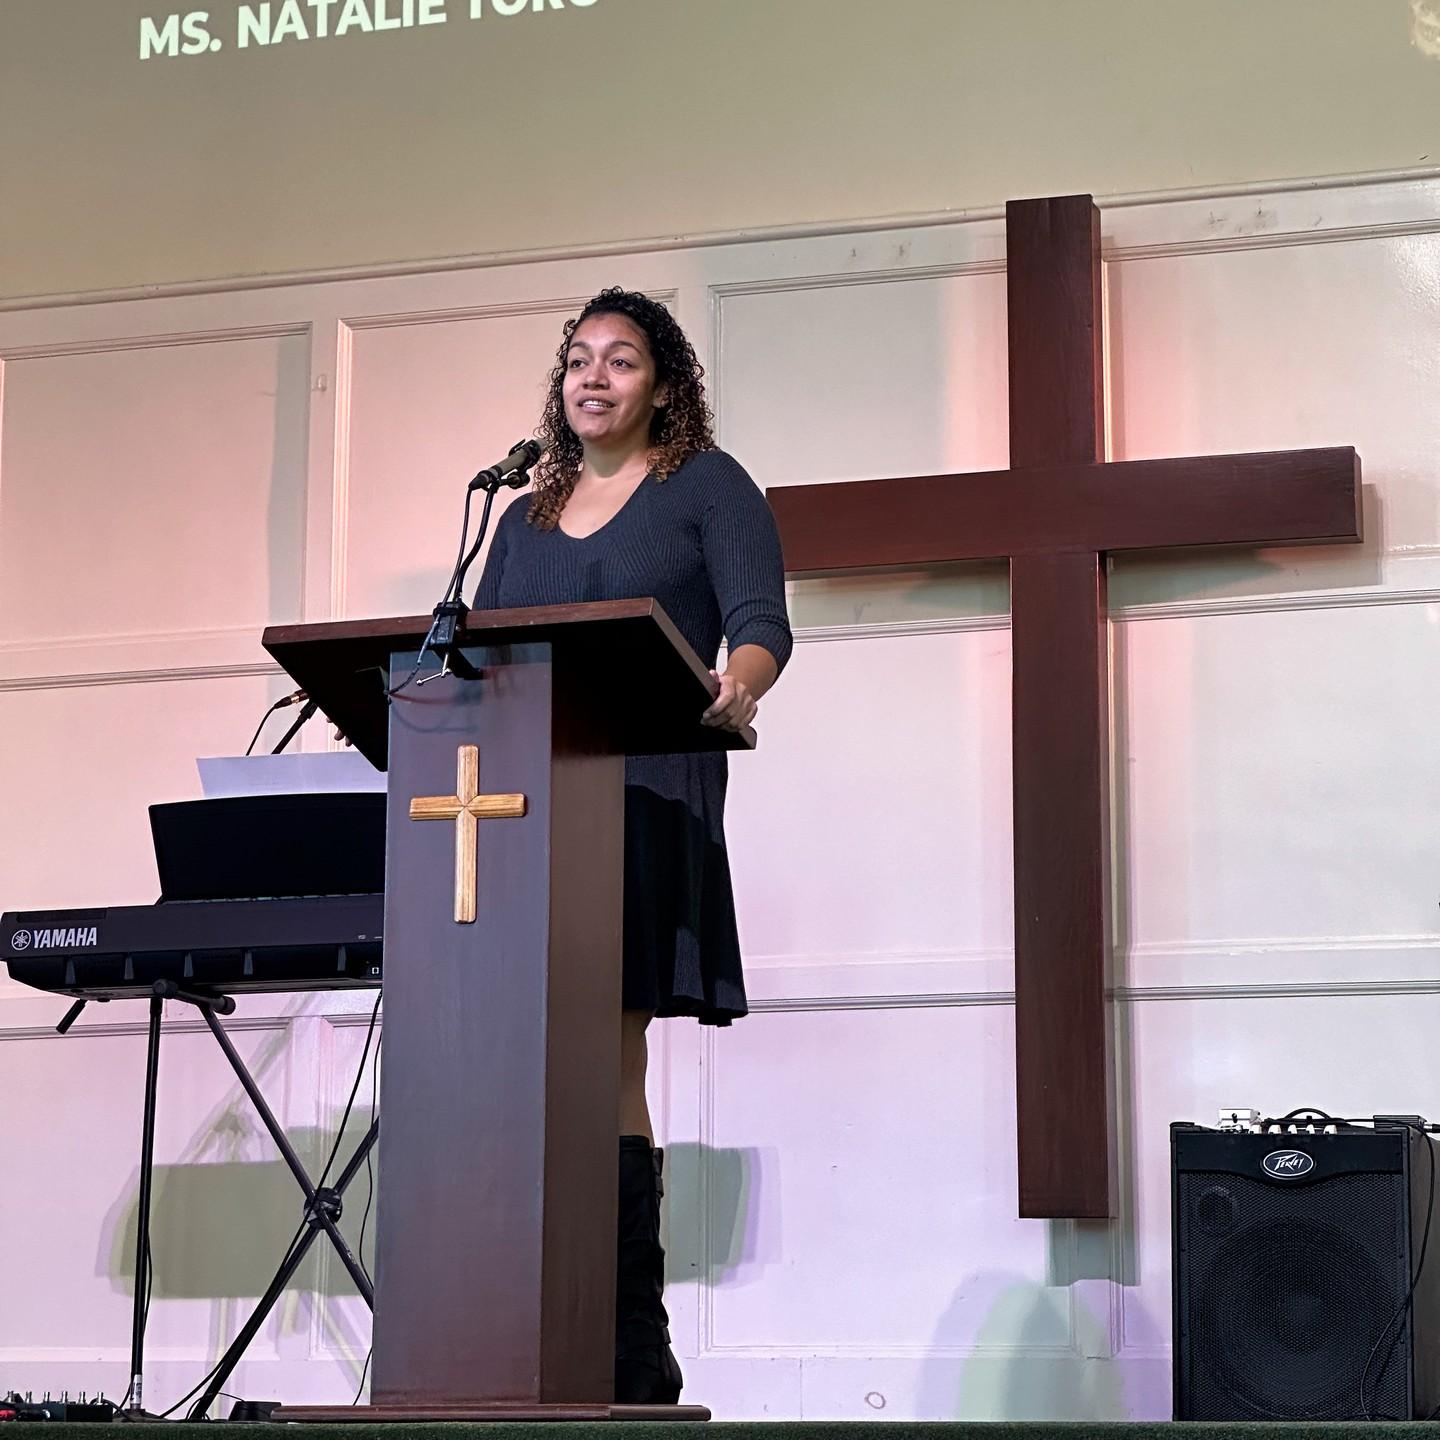 Praying for Natalie today &#8211; she&#8217;s one of our clinic volunteers and church attend&#8230;